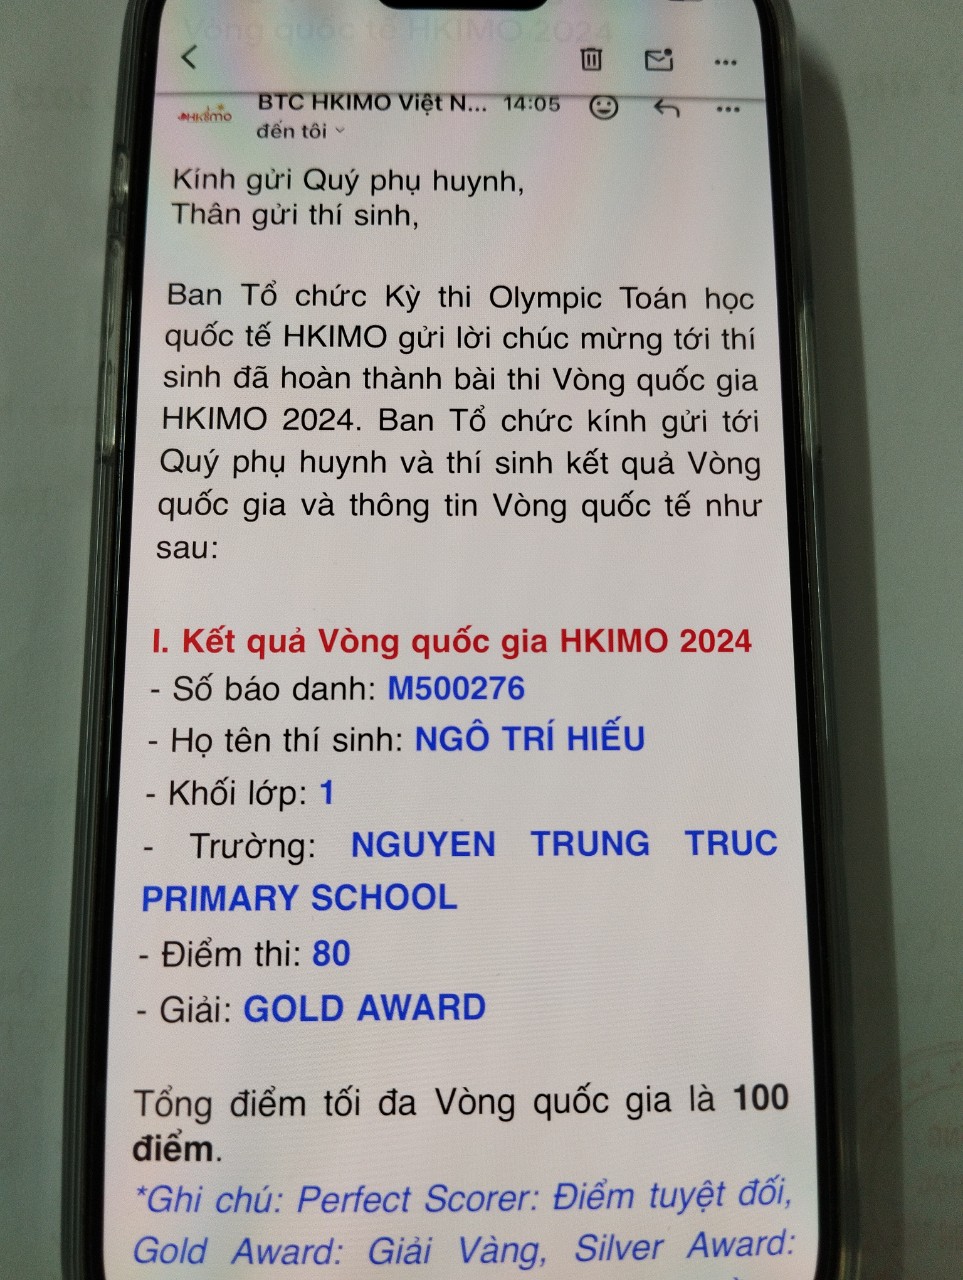 A cell phone with text on it

Description automatically generated